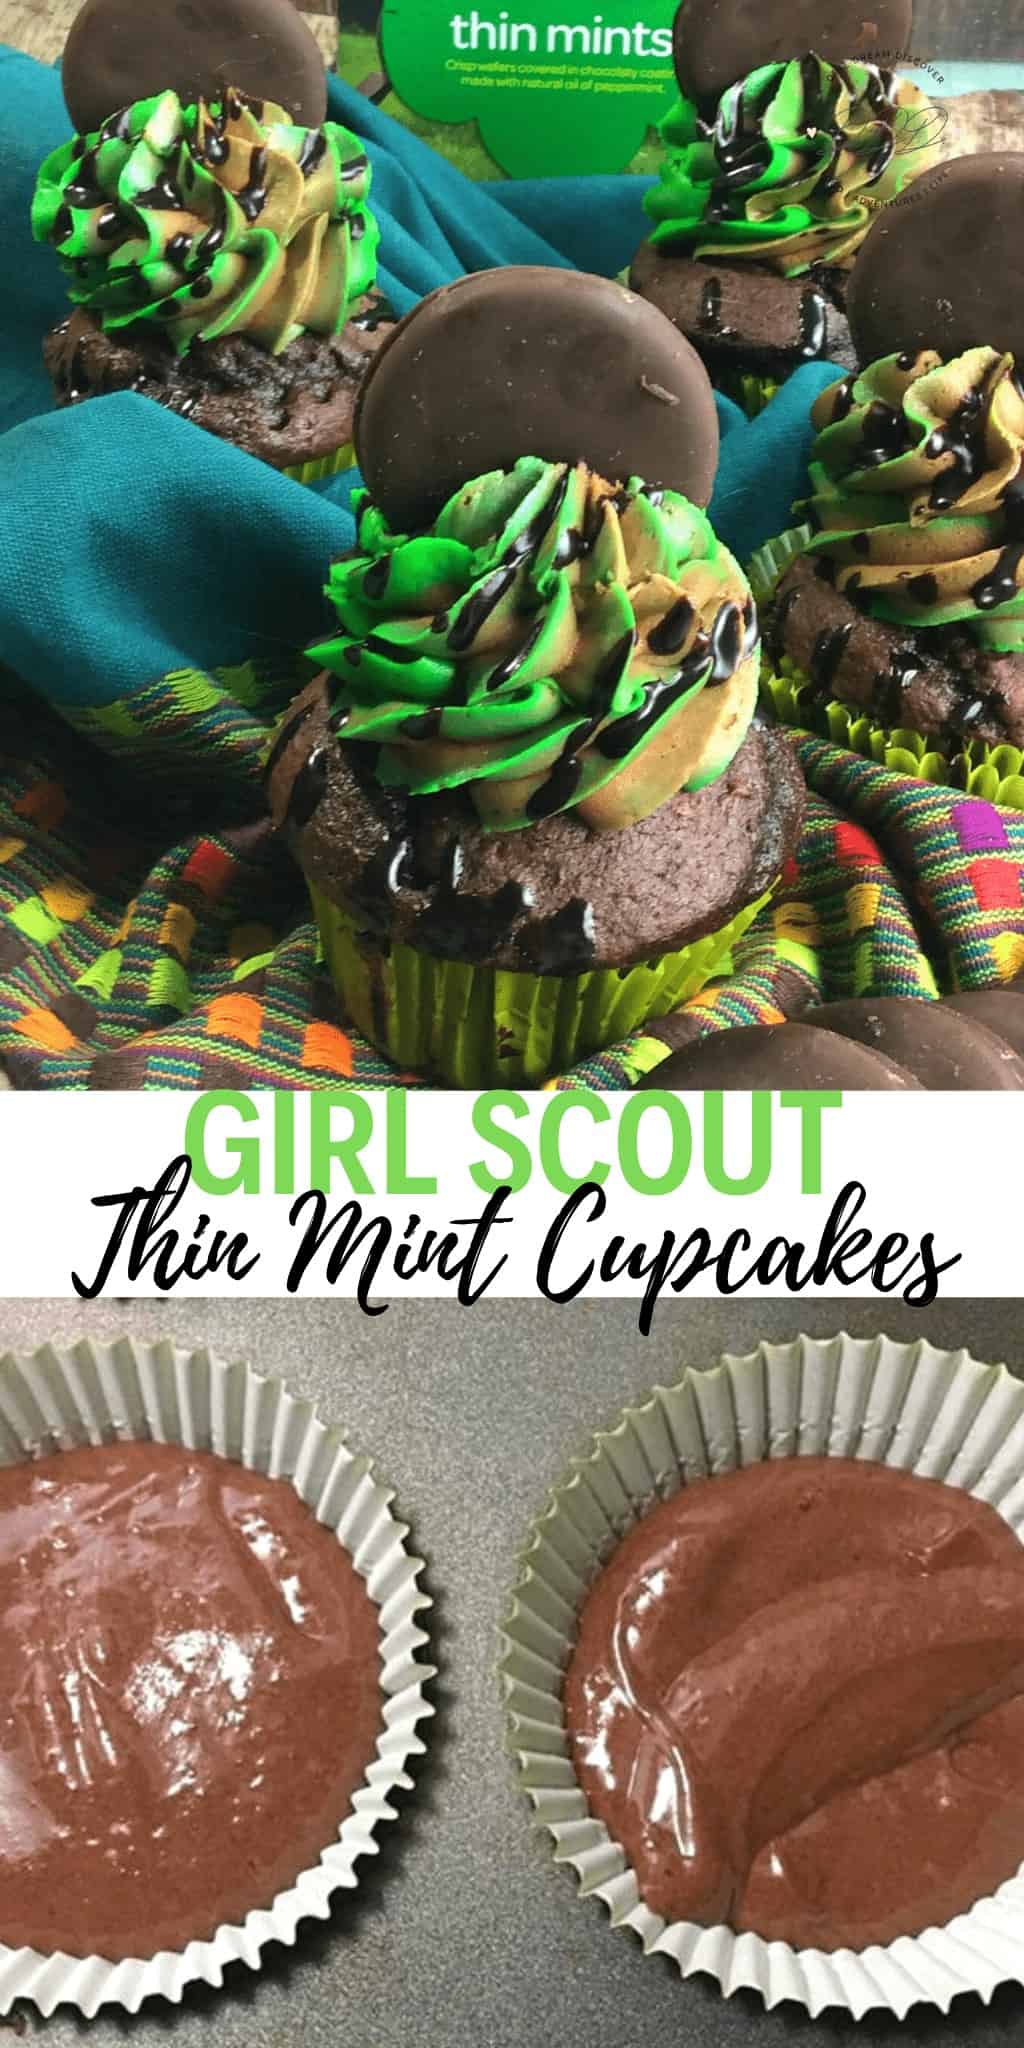 Girl Scout Cookies Thin Mint Cupcakes